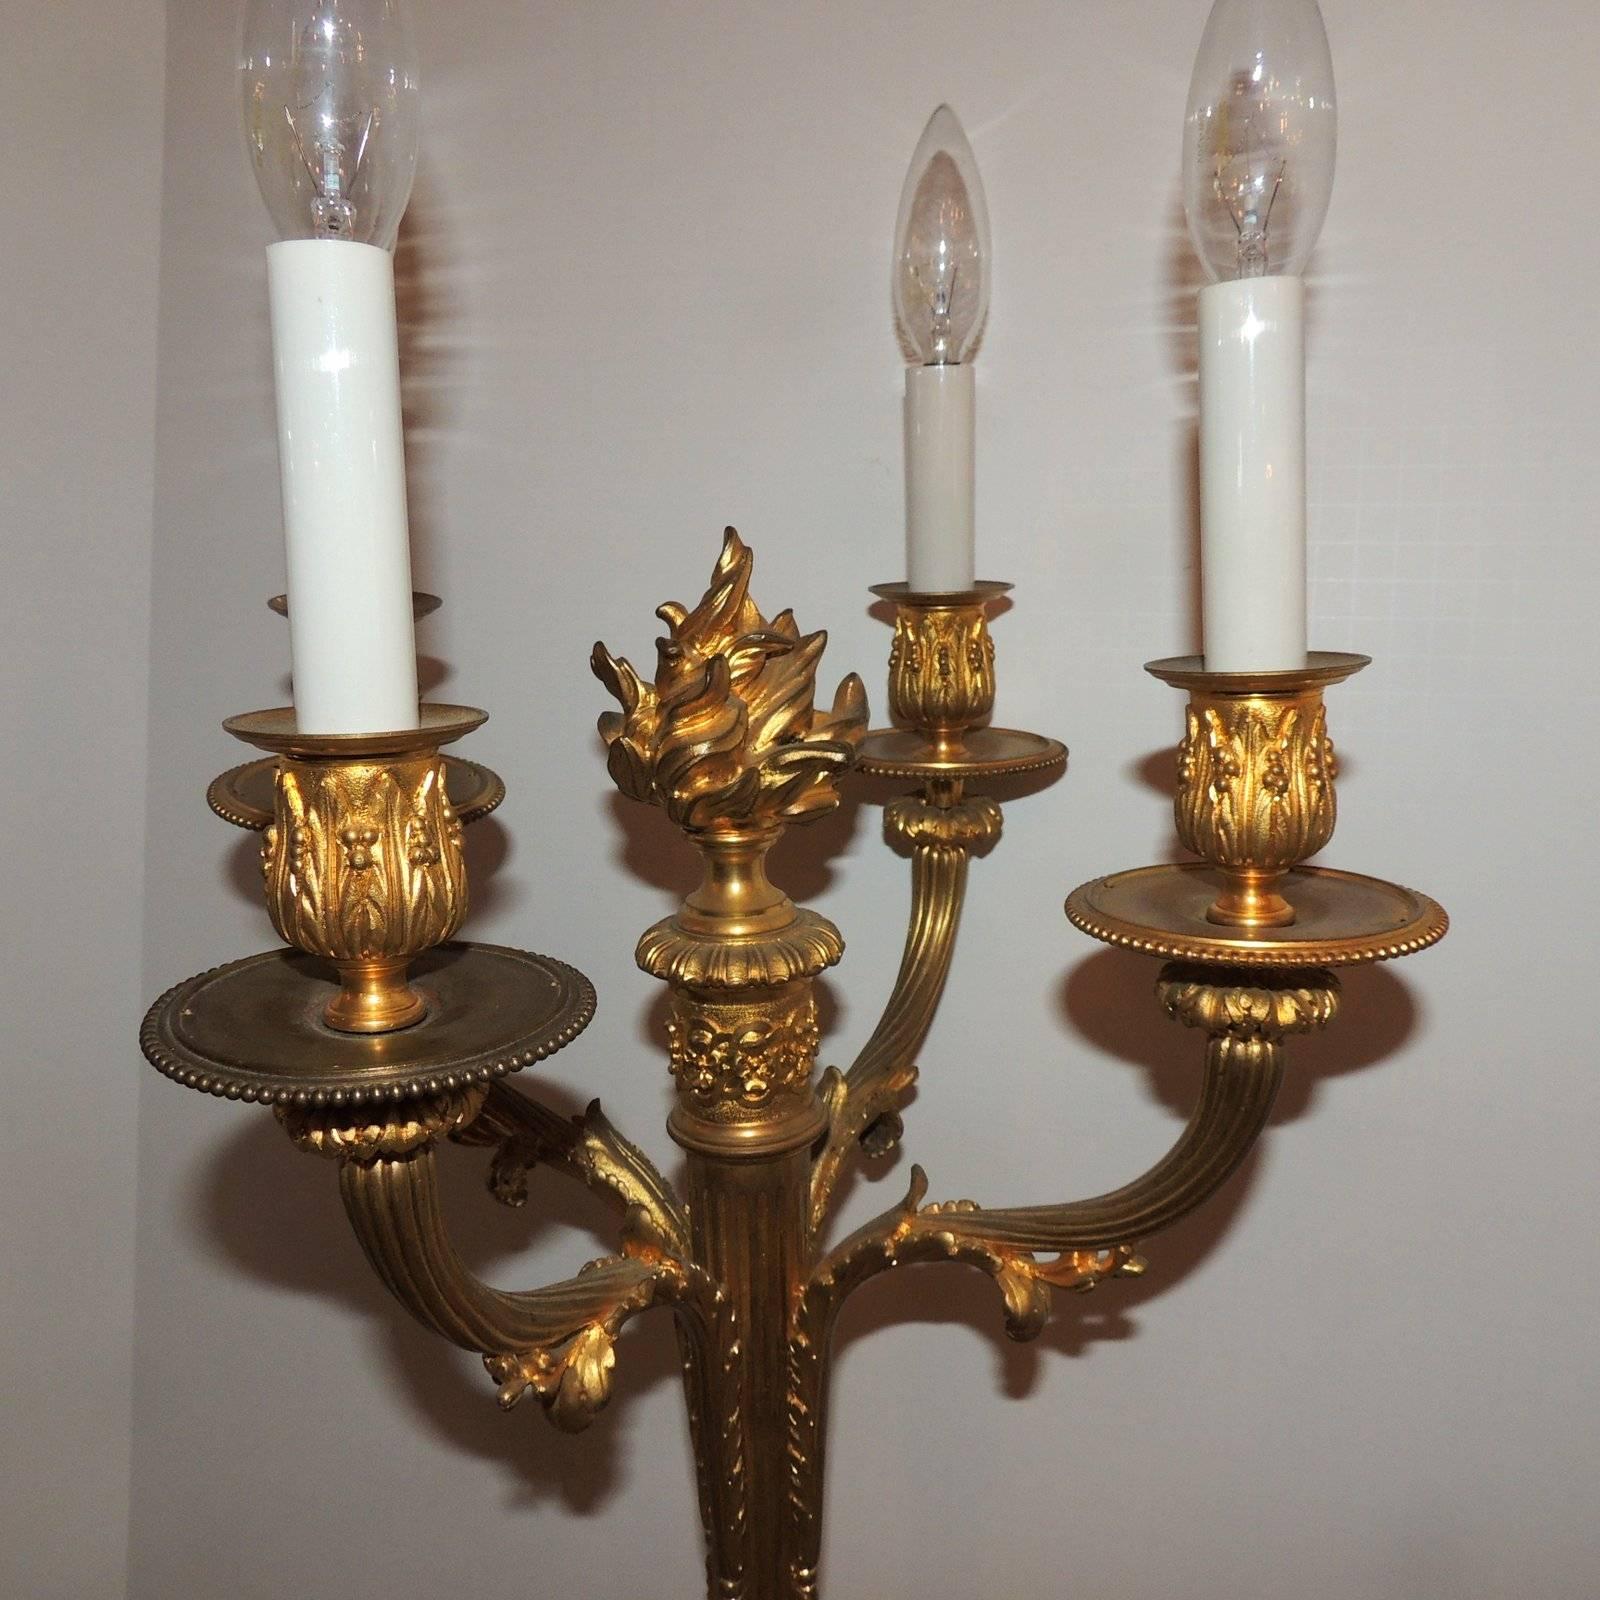 Gilt Wonderful Pair French Neoclassical Dore Bronze Regency Four-Arm Candelabra Lamps For Sale